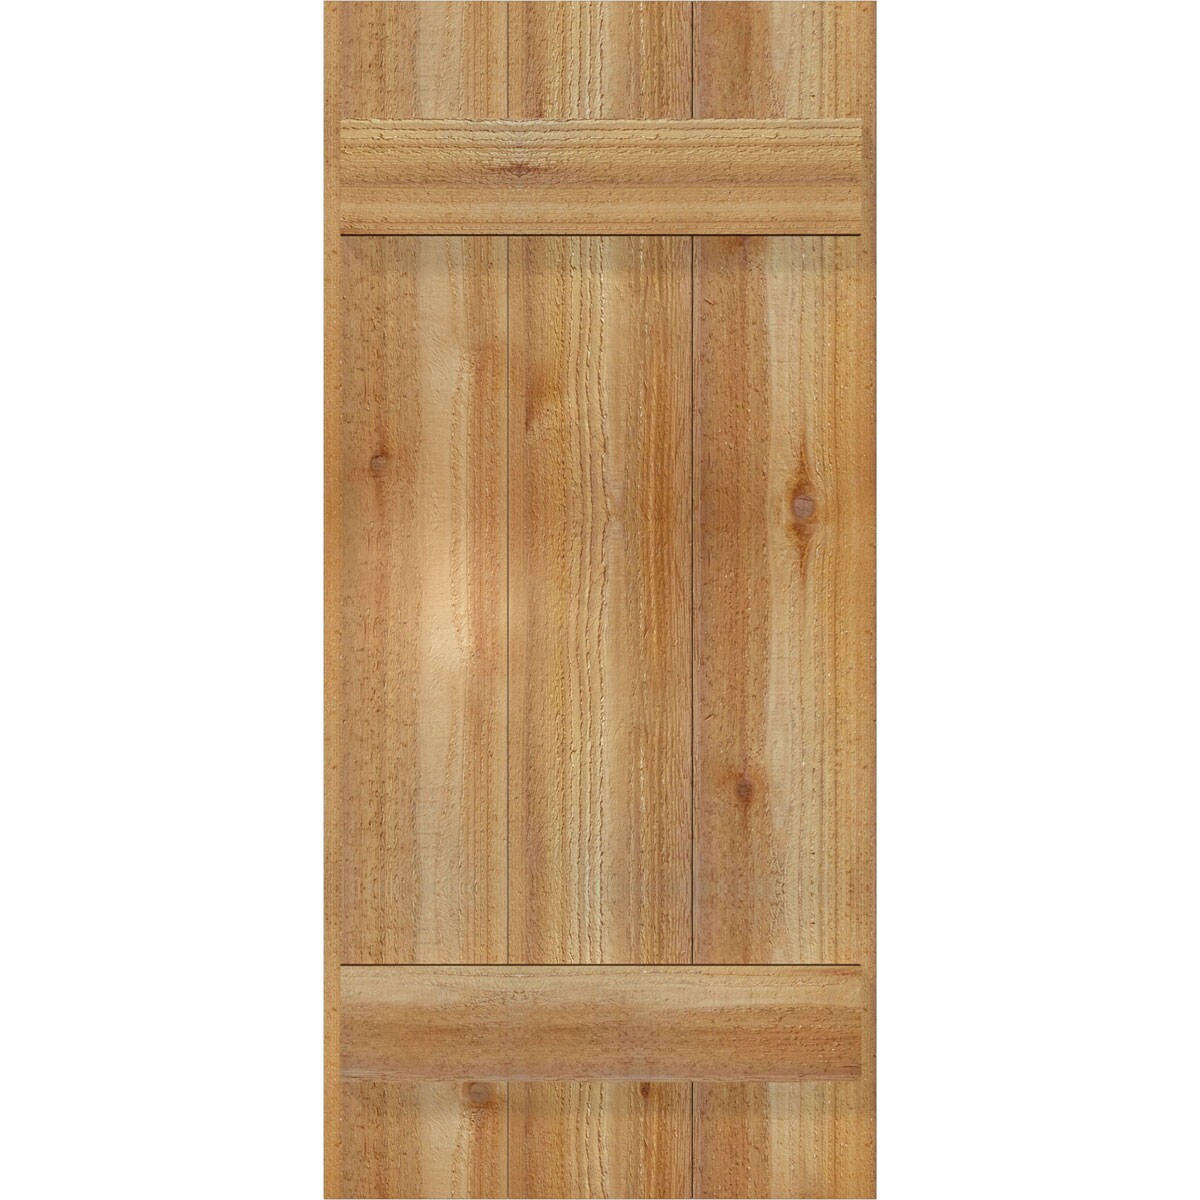 Ekena Millwork 2-Pack 16.125-in W x 35-in H Unfinished Board and Batten Wood Western Red cedar Exterior Shutters